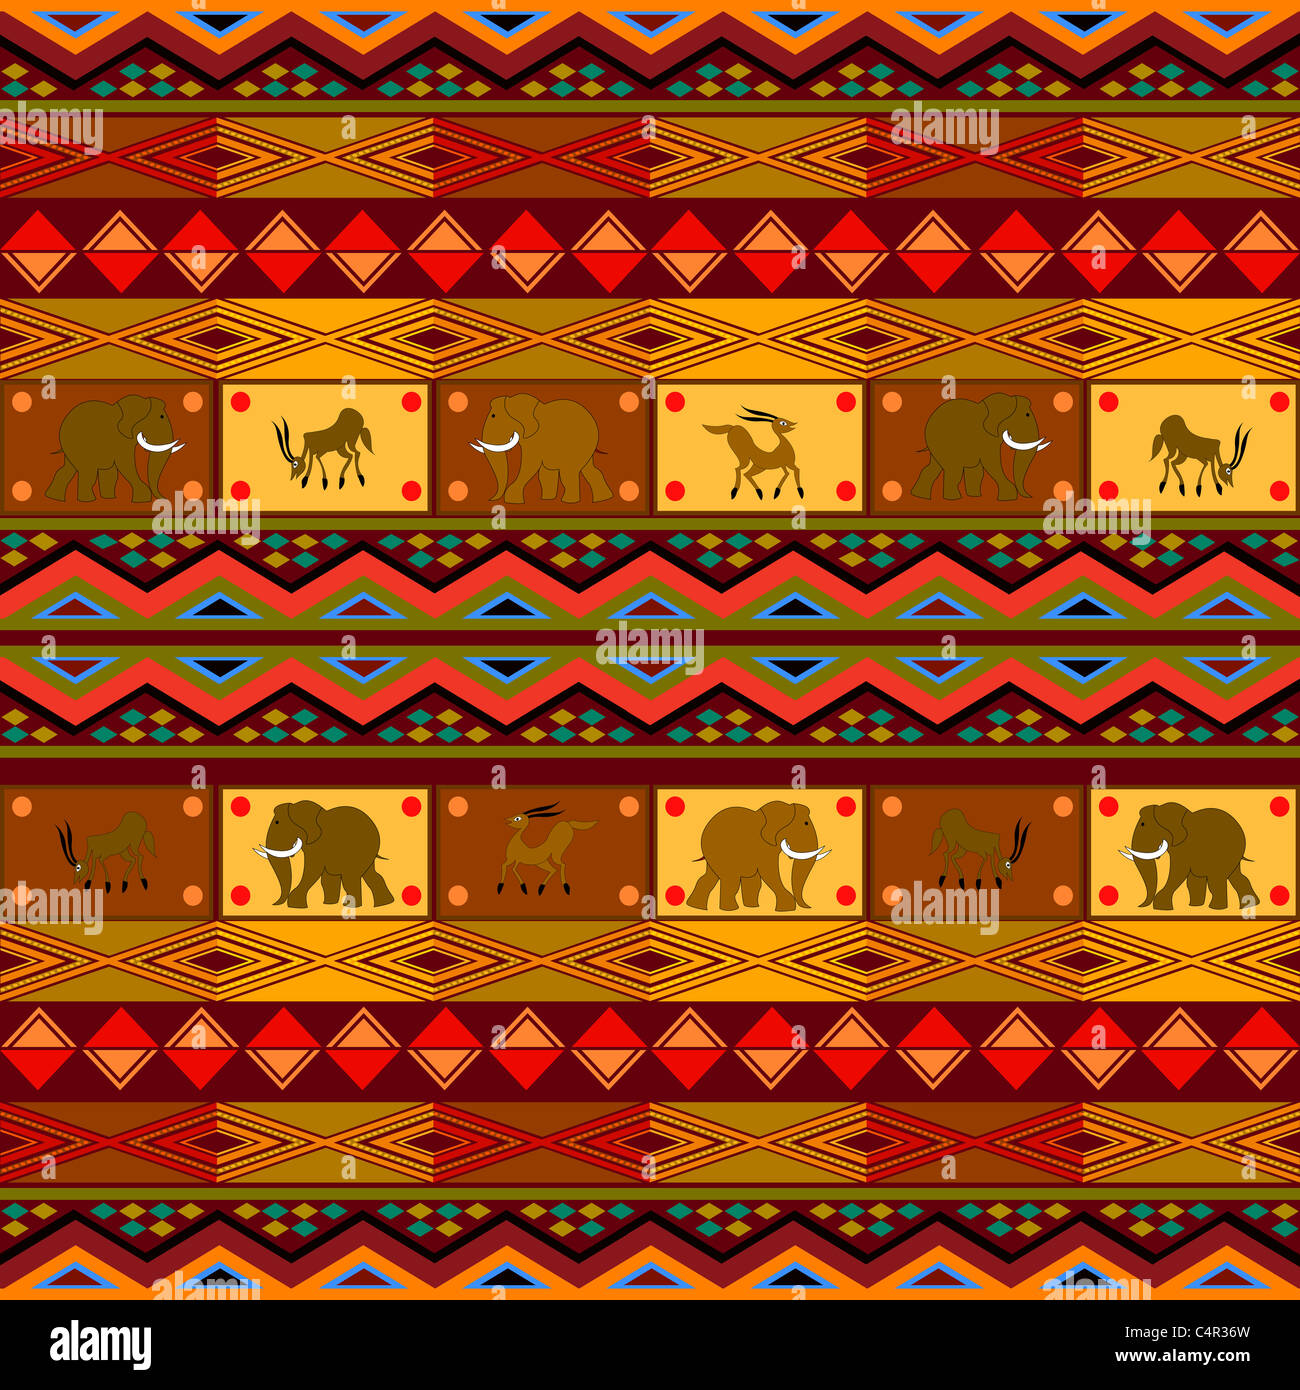 Ethnic pattern, decorative design with African motives. Stock Photo